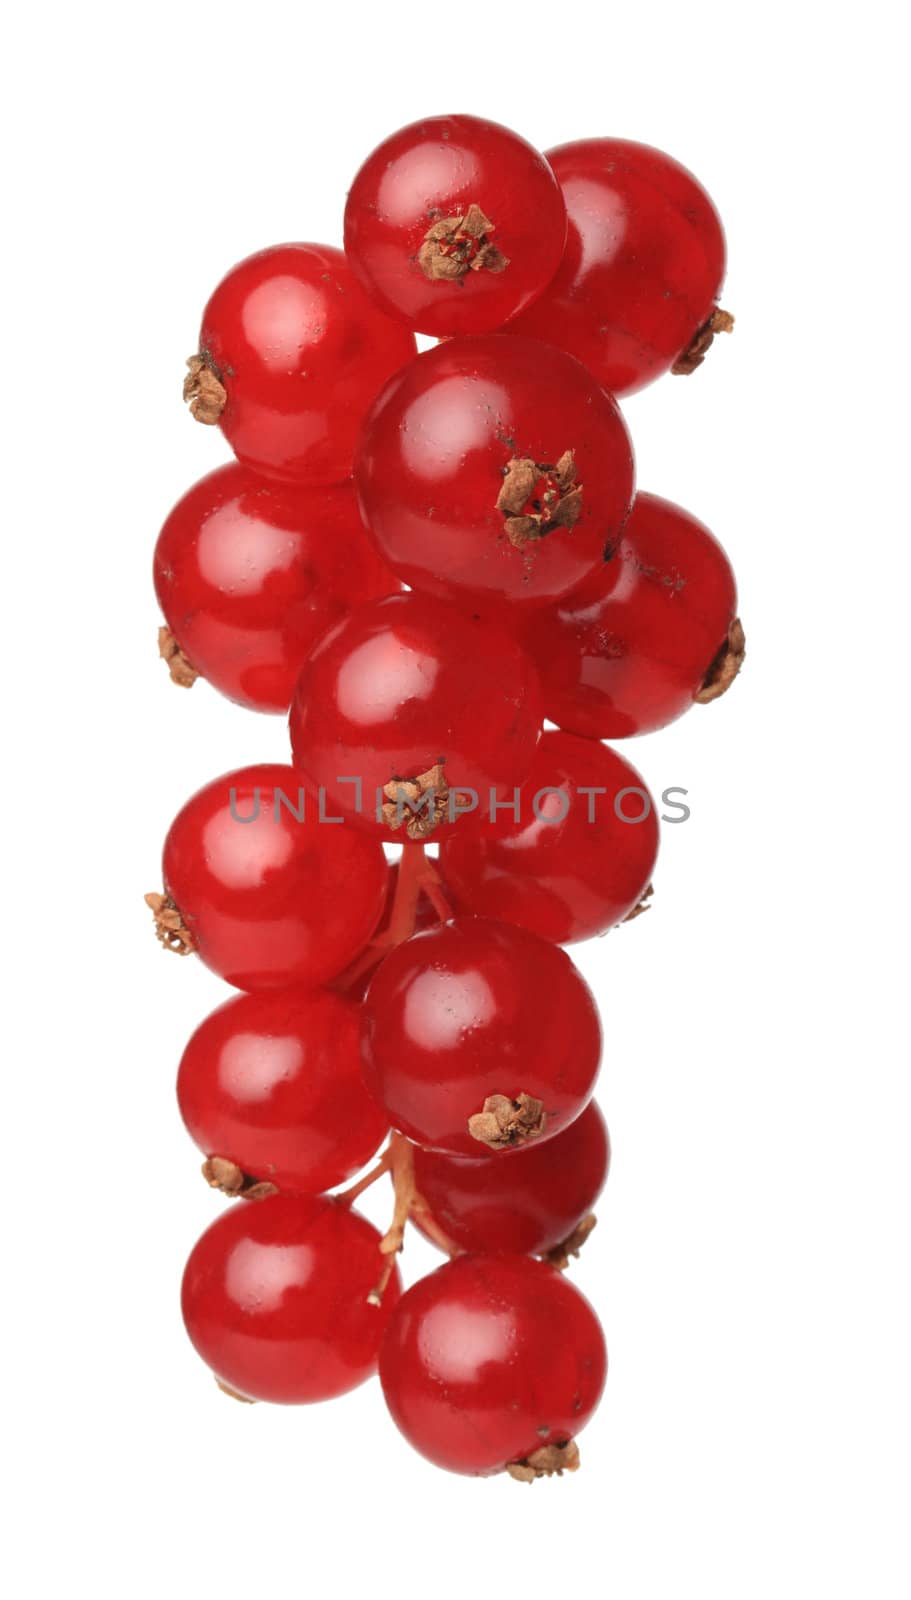 A bunch of redcurrants isolated against a white background.